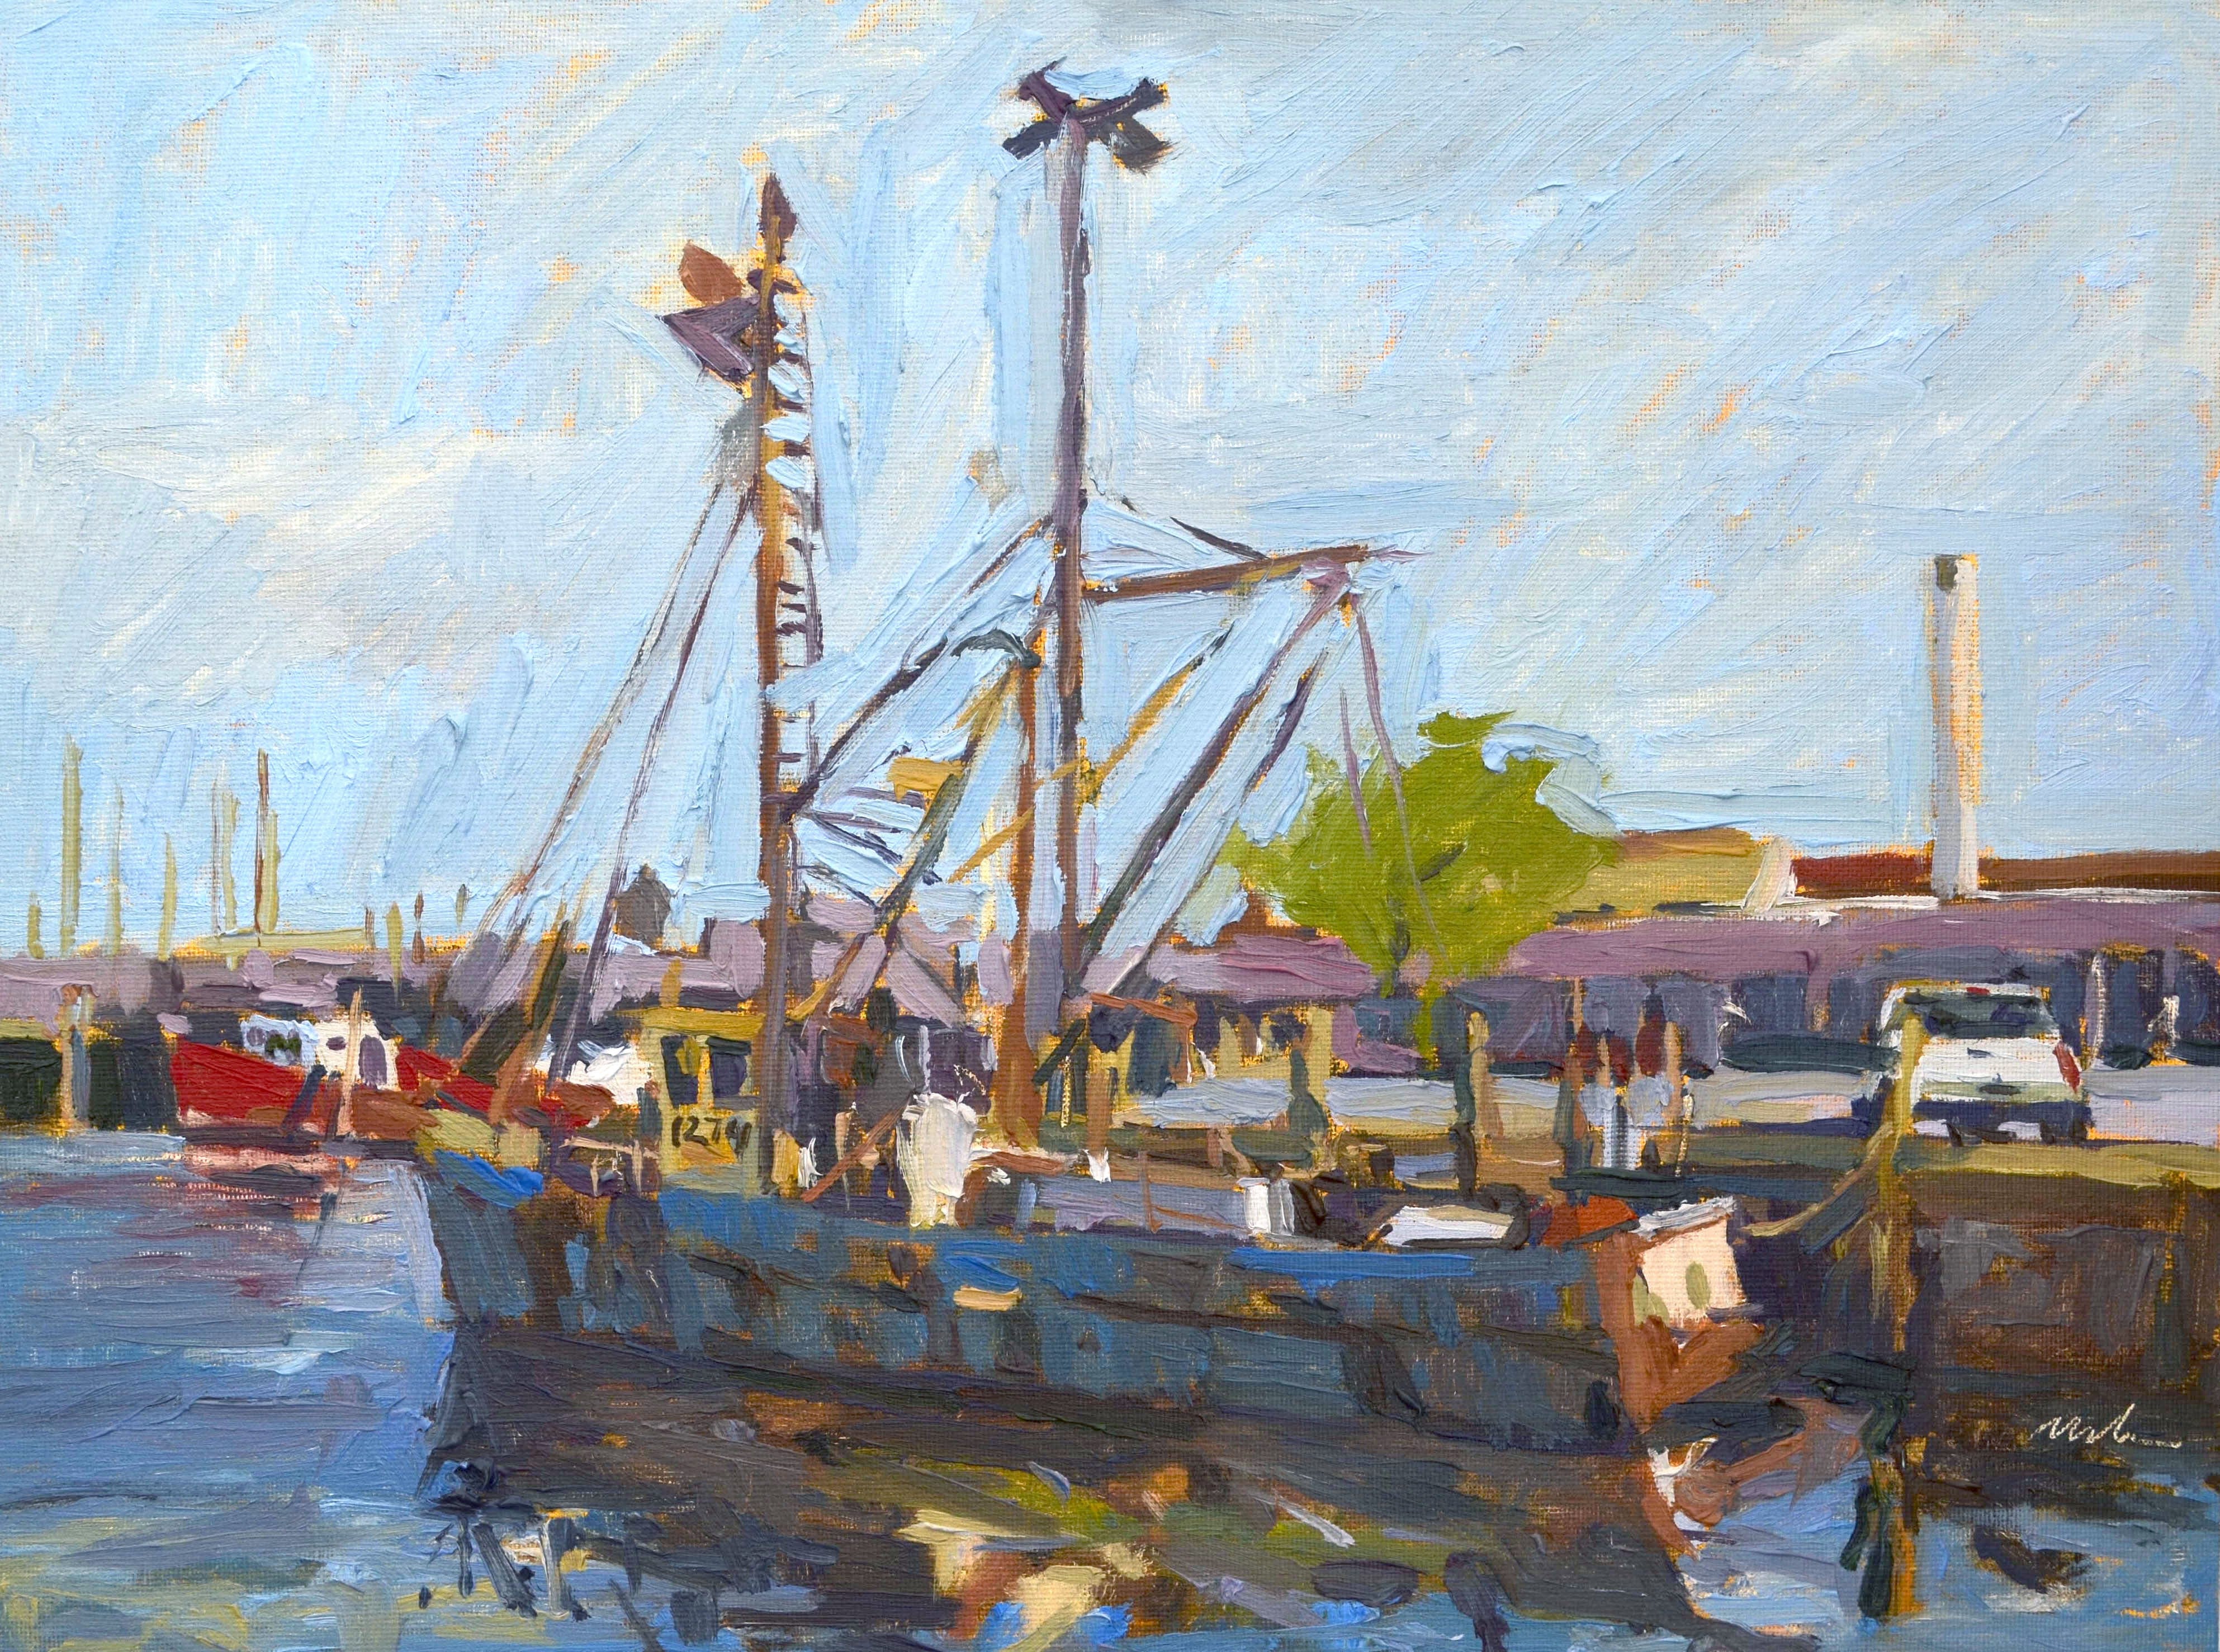 Original Oil Painting by Robert Abele - Unloading the Catch